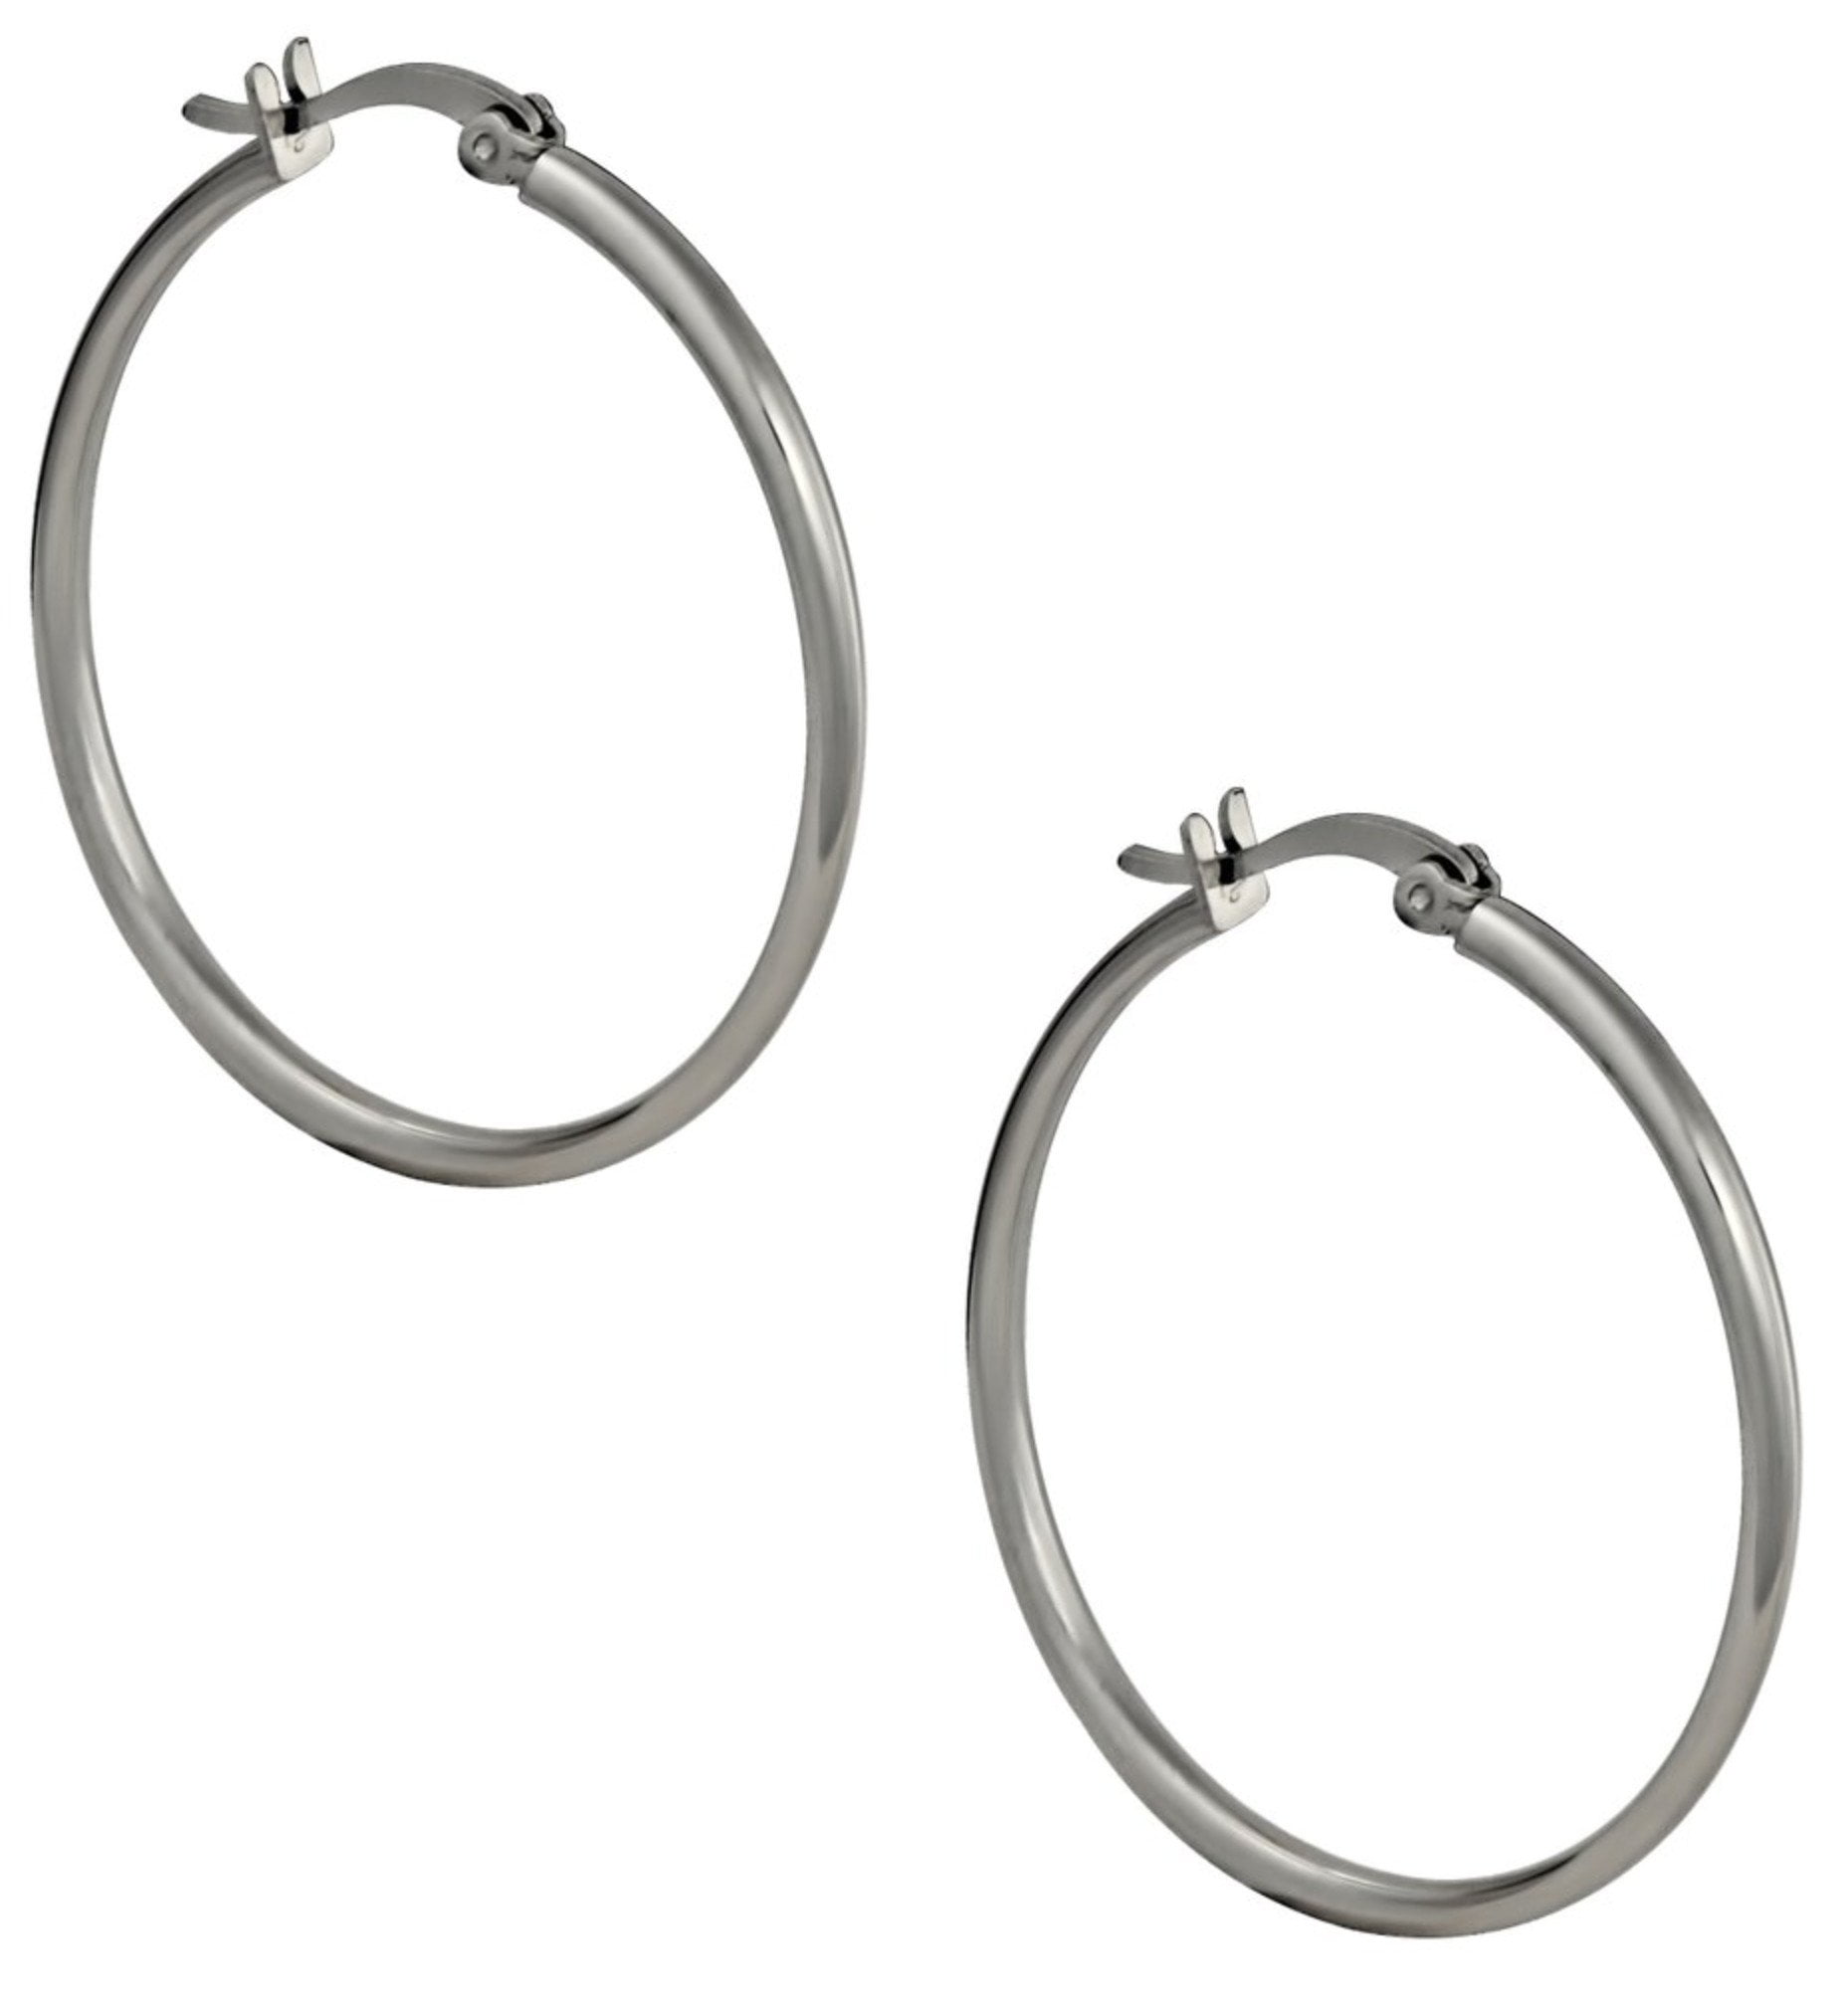 Stainless Steel Brown Plated 43mm Diameter Hoop Earrings Ear Hoops Set Fashion Jewelry For Women Gifts For Her